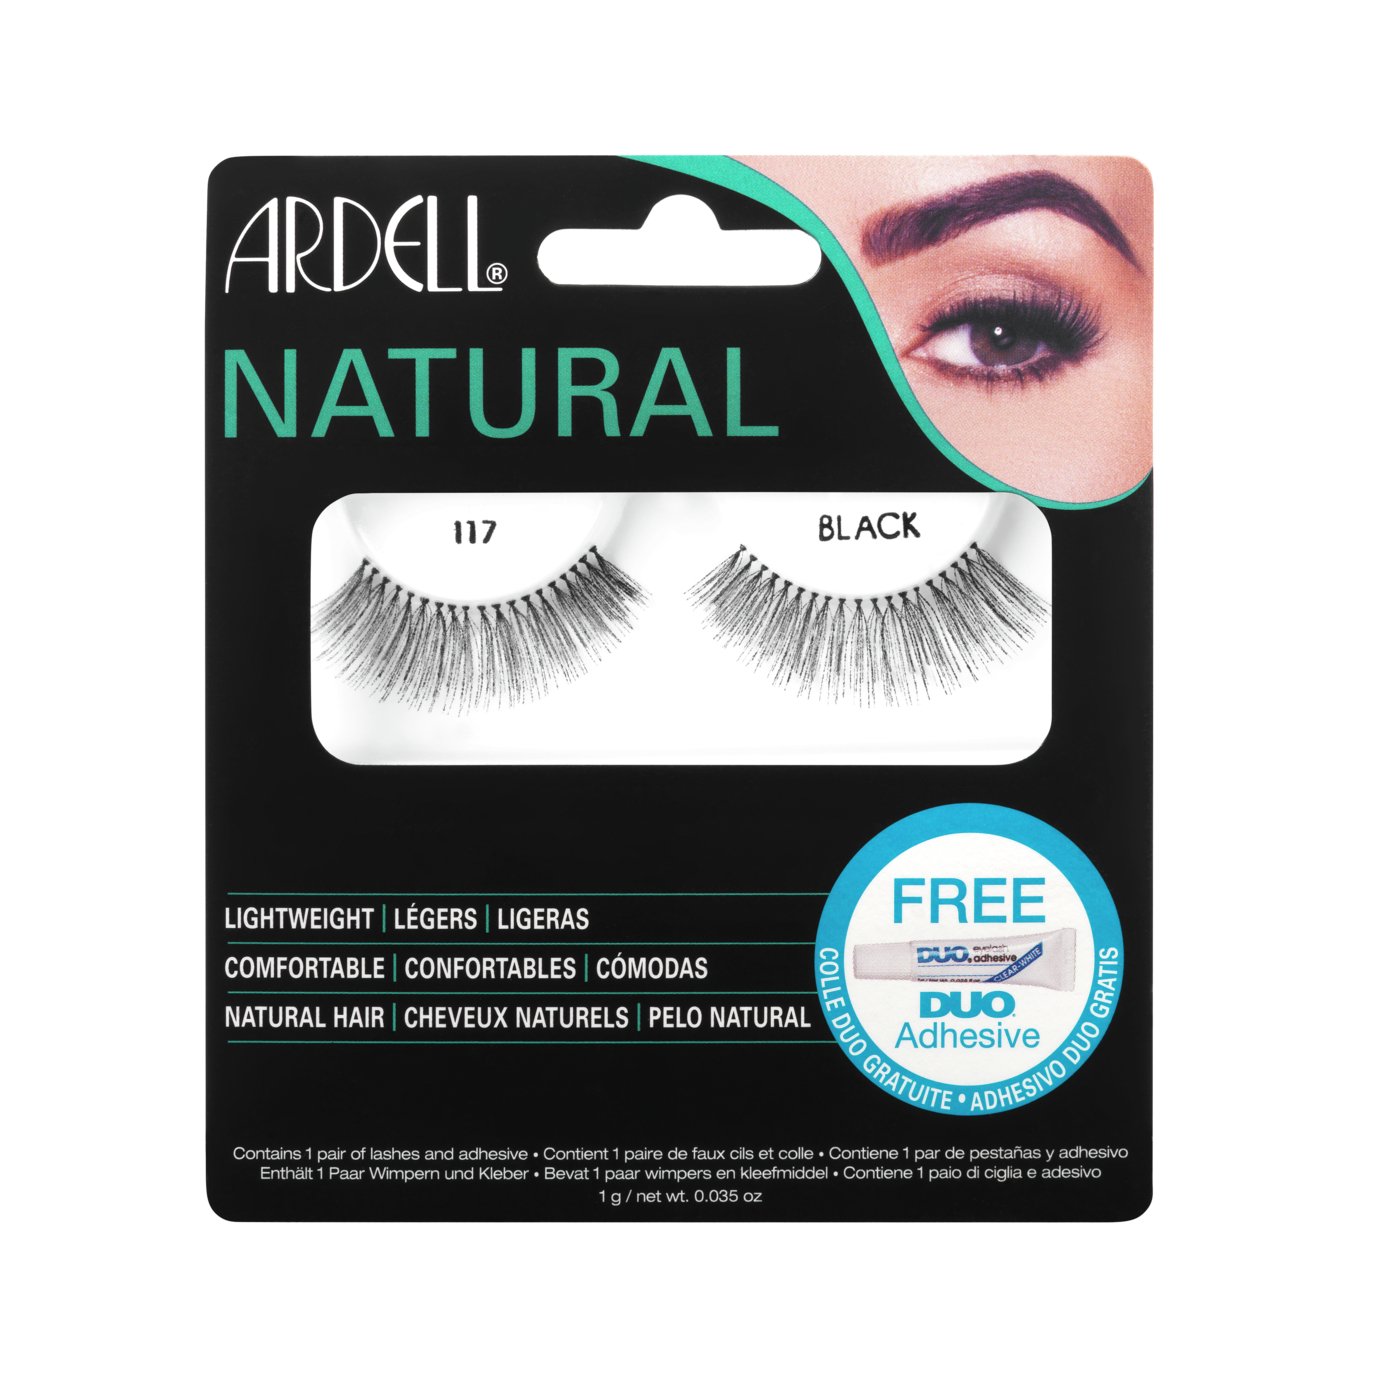 Ardell Natural Lashes in Style 117